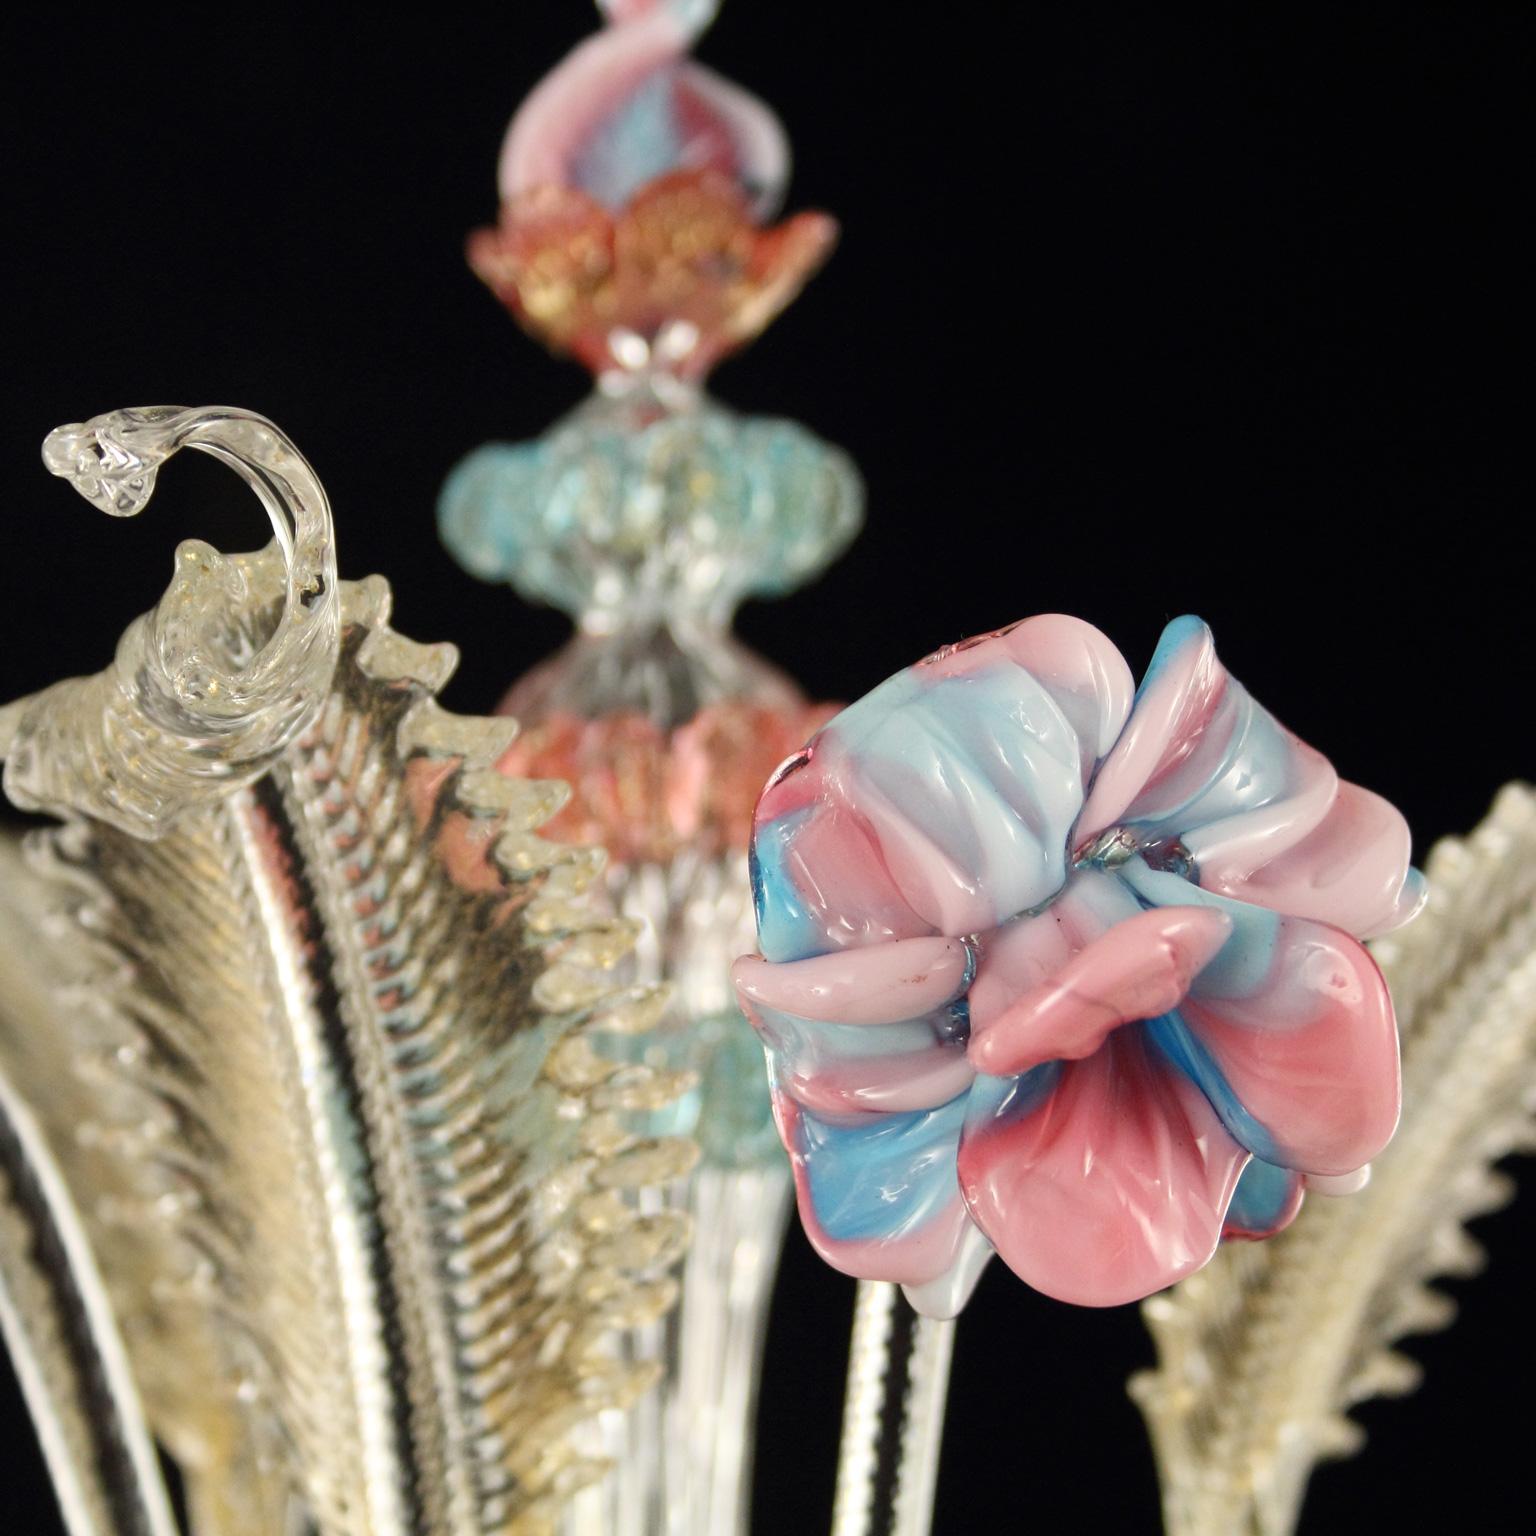 Caesar wall 3-light, crystal and gold, vitreous paste flowers, details in pink and light blue by Multiforme.
The name, as well as the structure evokes the splendor of the past centuries. It is an evergreen model, a Classic product manufactured by